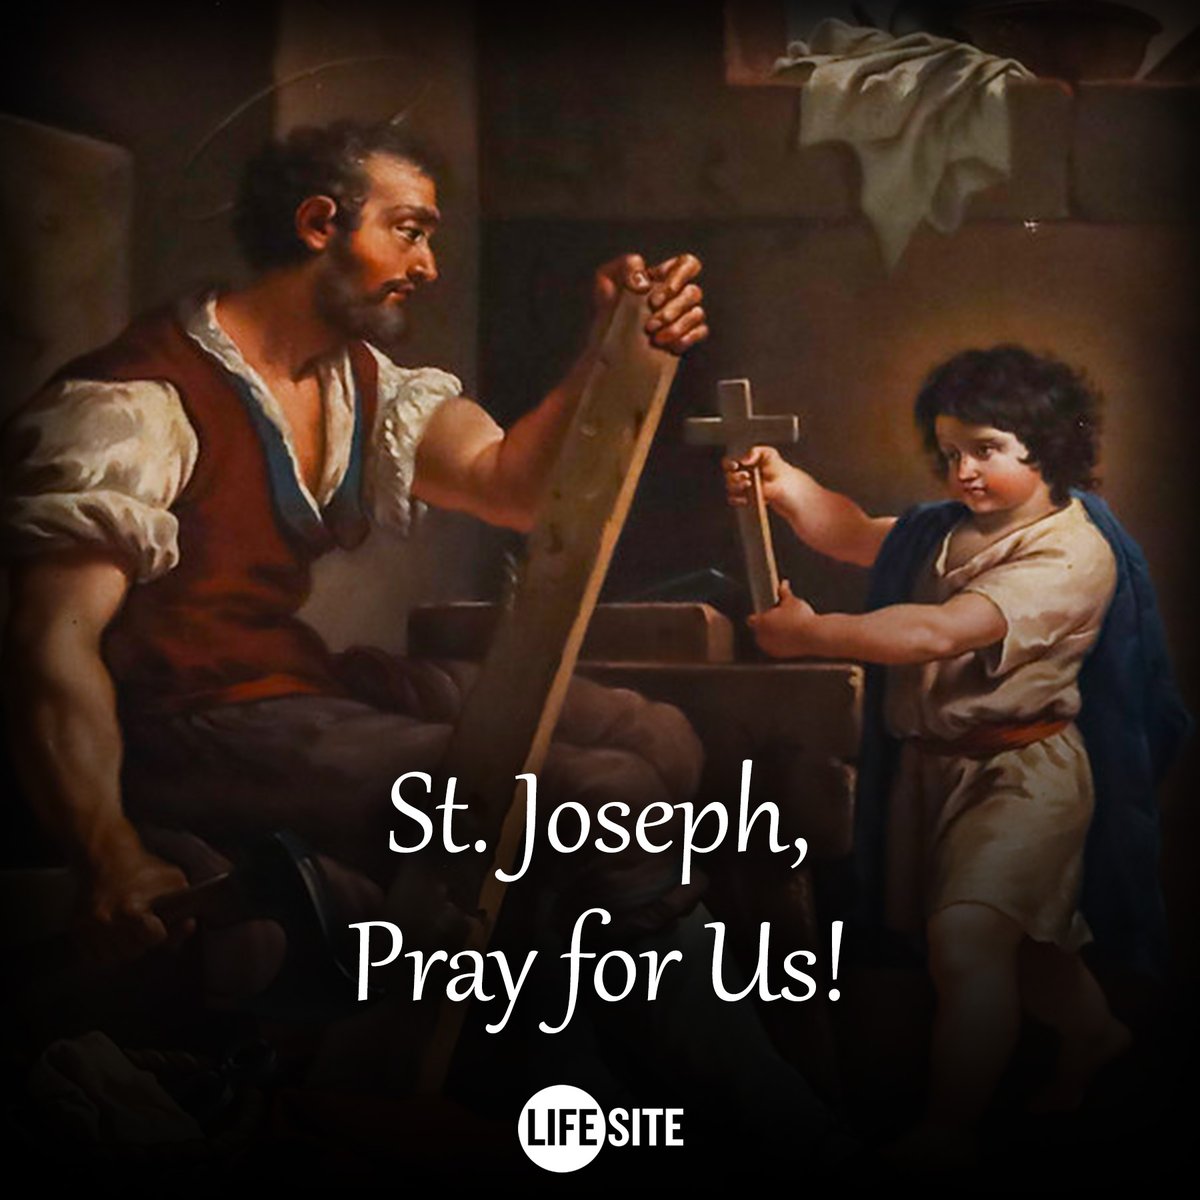 Grant, we pray, almighty God, that by Saint Joseph's intercession your Church may constantly watch over the unfolding of the mysteries of human salvation, whose beginnings you entrusted to his faithful care. READ MORE: lifesitenews.com/catholic/?utm_… #CatholicX #StJoseph #Catholic